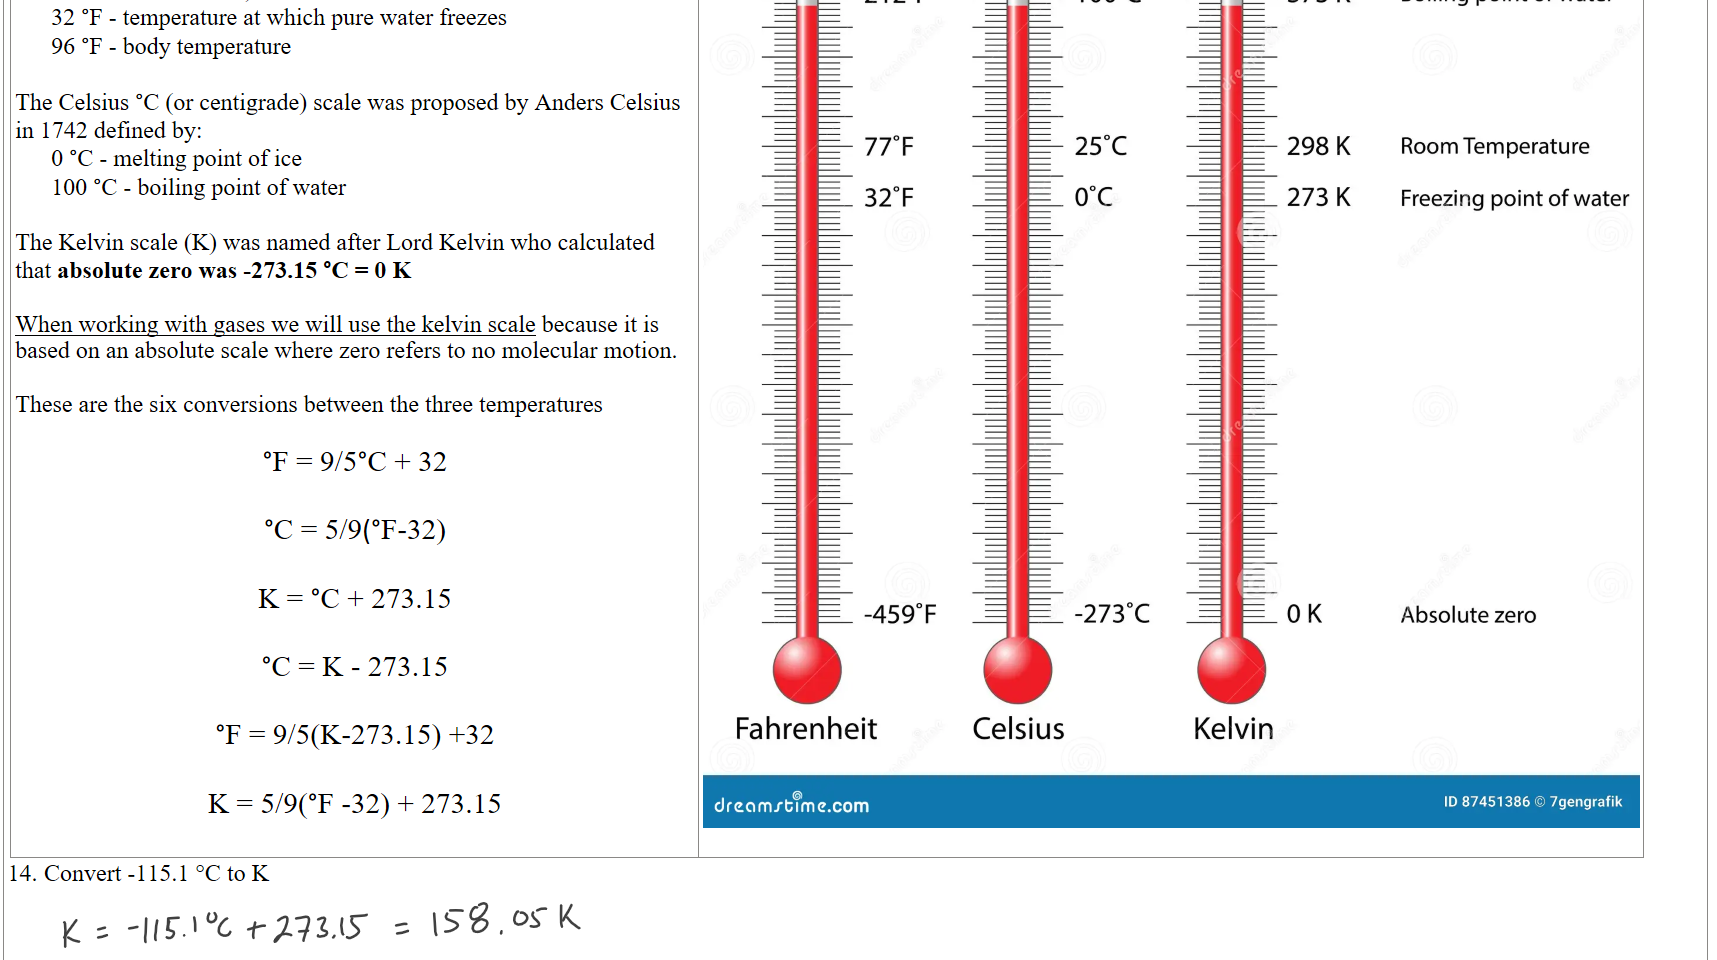 0 °F - temperature at which brine (1:1:1 mixtures of ice, water, and ammonium chloride) freezes
32 °F - temperature at which pure water freezes
96 °F - body temperature

The Celsius °C (or centigrade) scale was proposed by Anders Celsius in 1742 defined by:
0 °C - melting point of ice
100 °C - boiling point of water

The Kelvin scale (K) was named after Lord Kelvin who calculated that absolute zero was -273.15 °C = 0 K

When working with gases we will use the kelvin scale because it is based on an absolute scale where zero refers to no molecular motion. 

These are the six conversions between the three temperatures

°F = 9/5°C + 32

°C = 5/9(°F-32)

K = °C + 273.15

°C = K - 273.15

°F = 9/5(K-273.15) +32

K = 5/9(°F -32) + 273.15
Untitled picture.png Machine generated alternative text:
2120F 
770F 
320F 
-4590F 
Fahrenheit 
dr@amrblme.com 
1 oooc 
250C 
ooc 
-2730C 
Celsius 
373 K 
298 K 
273 K 
OK 
Kelvin 
Boiling point of water 
Room Temperature 
Freezing point of water 
Absolute zero 
ID 87451386 0 7gengrafik 

Convert -115.1 °C to K



Ink Drawings
Ink Drawings
Ink Drawings
Ink Drawings
Ink Drawings
Ink Drawings
Ink Drawings
Ink Drawings
Ink Drawings
Ink Drawings
Ink Drawings
Ink Drawings
Ink Drawings
Ink Drawings
Ink Drawings
Ink Drawings
Ink Drawings
Ink Drawings
Ink Drawings
Ink Drawings
Ink Drawings
Ink Drawings
Ink Drawings
Ink Drawings
Ink Drawings
Ink Drawings
Ink Drawings
Ink Drawings
Ink Drawings
Ink Drawings
Ink Drawings
Ink Drawings
Ink Drawings
Ink Drawings
Ink Drawings
Ink Drawings
Ink Drawings
Ink Drawings
Ink Drawings
